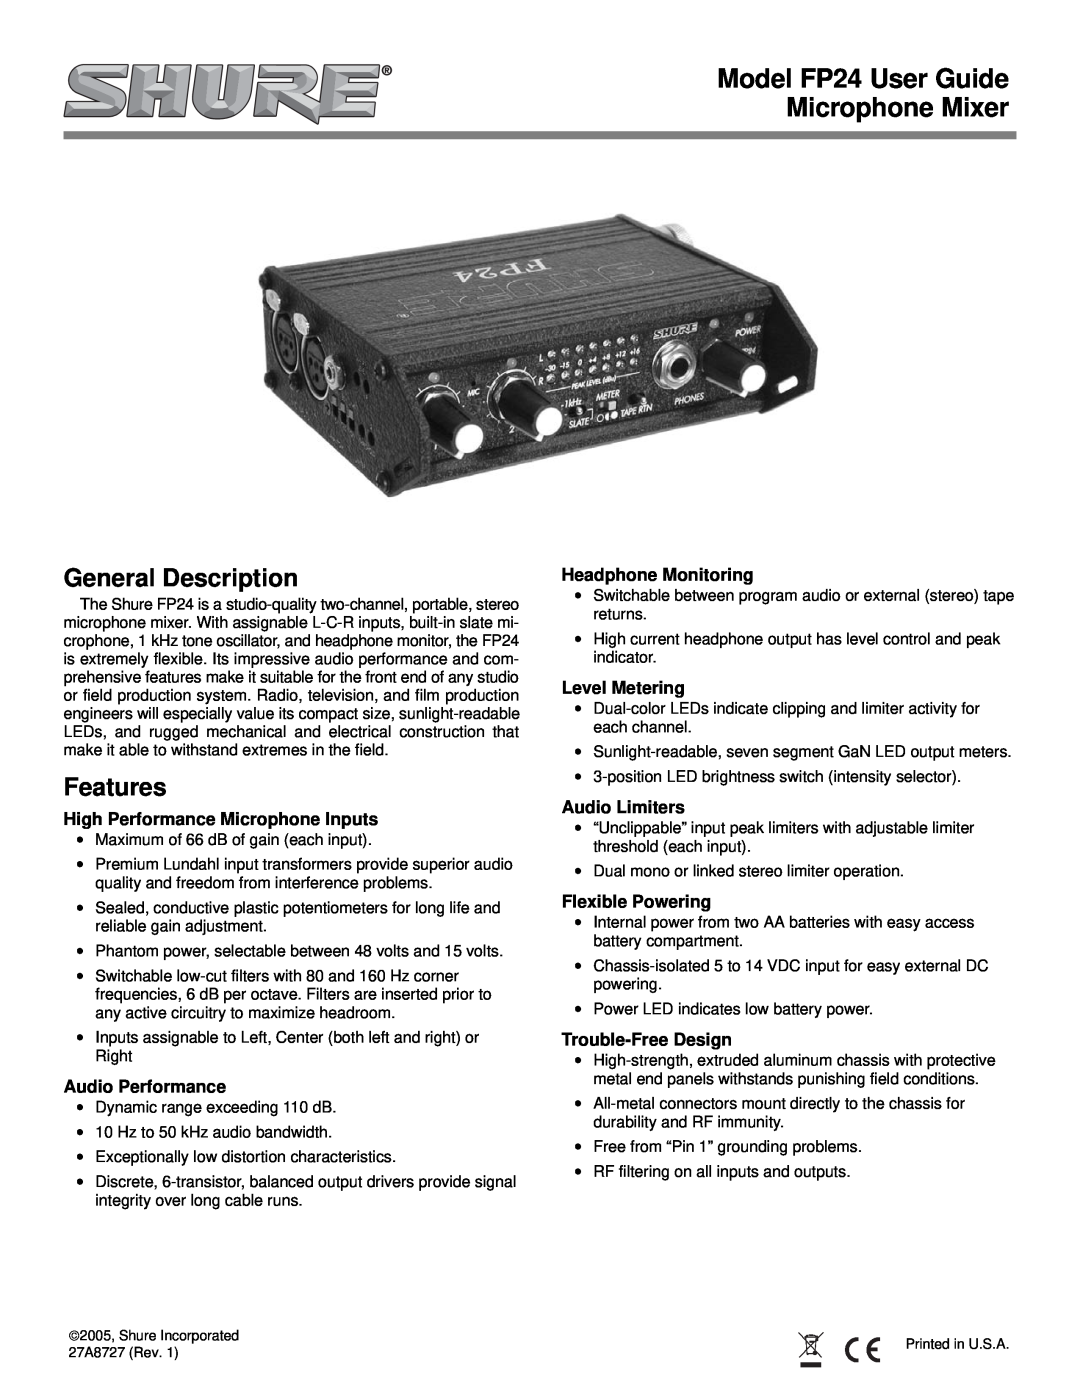 Shure FP24 manual General Description, Features, High Performance Microphone Inputs, Audio Performance, Level Metering 